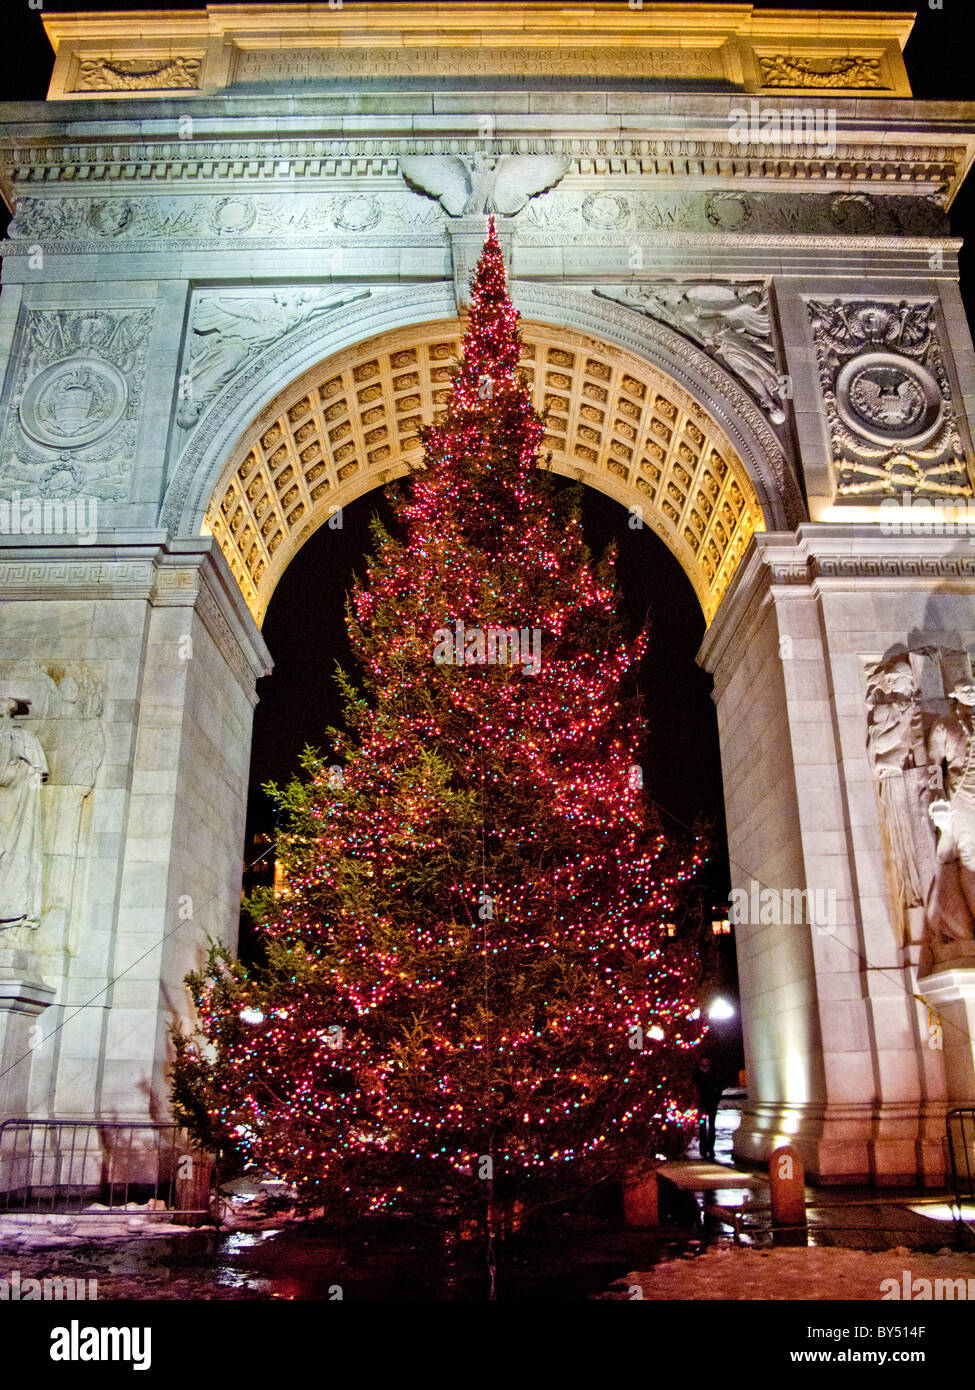 A Christmas tree decorates the famous arch in Washington Square, New York City. Stock Photo